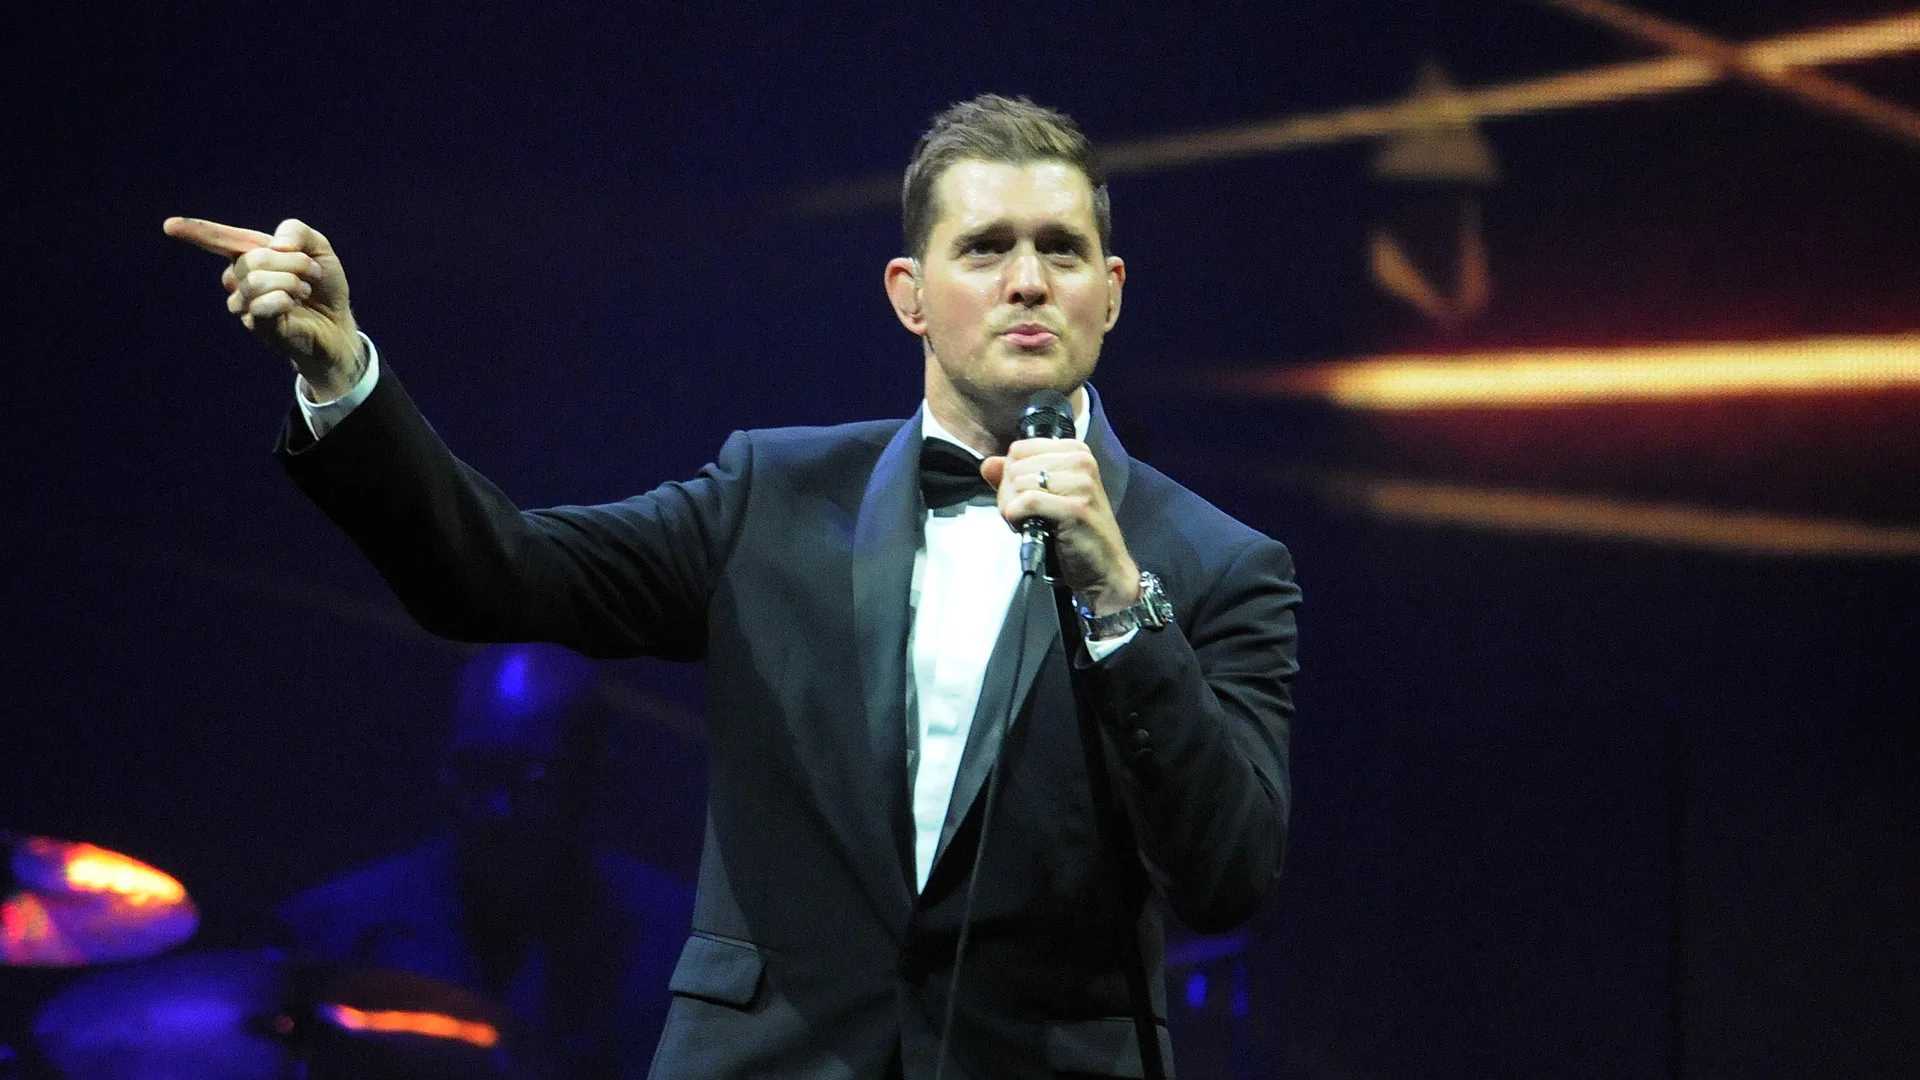 A photograph of the singer Michael Buble wearing a tux with a mic performing on stage